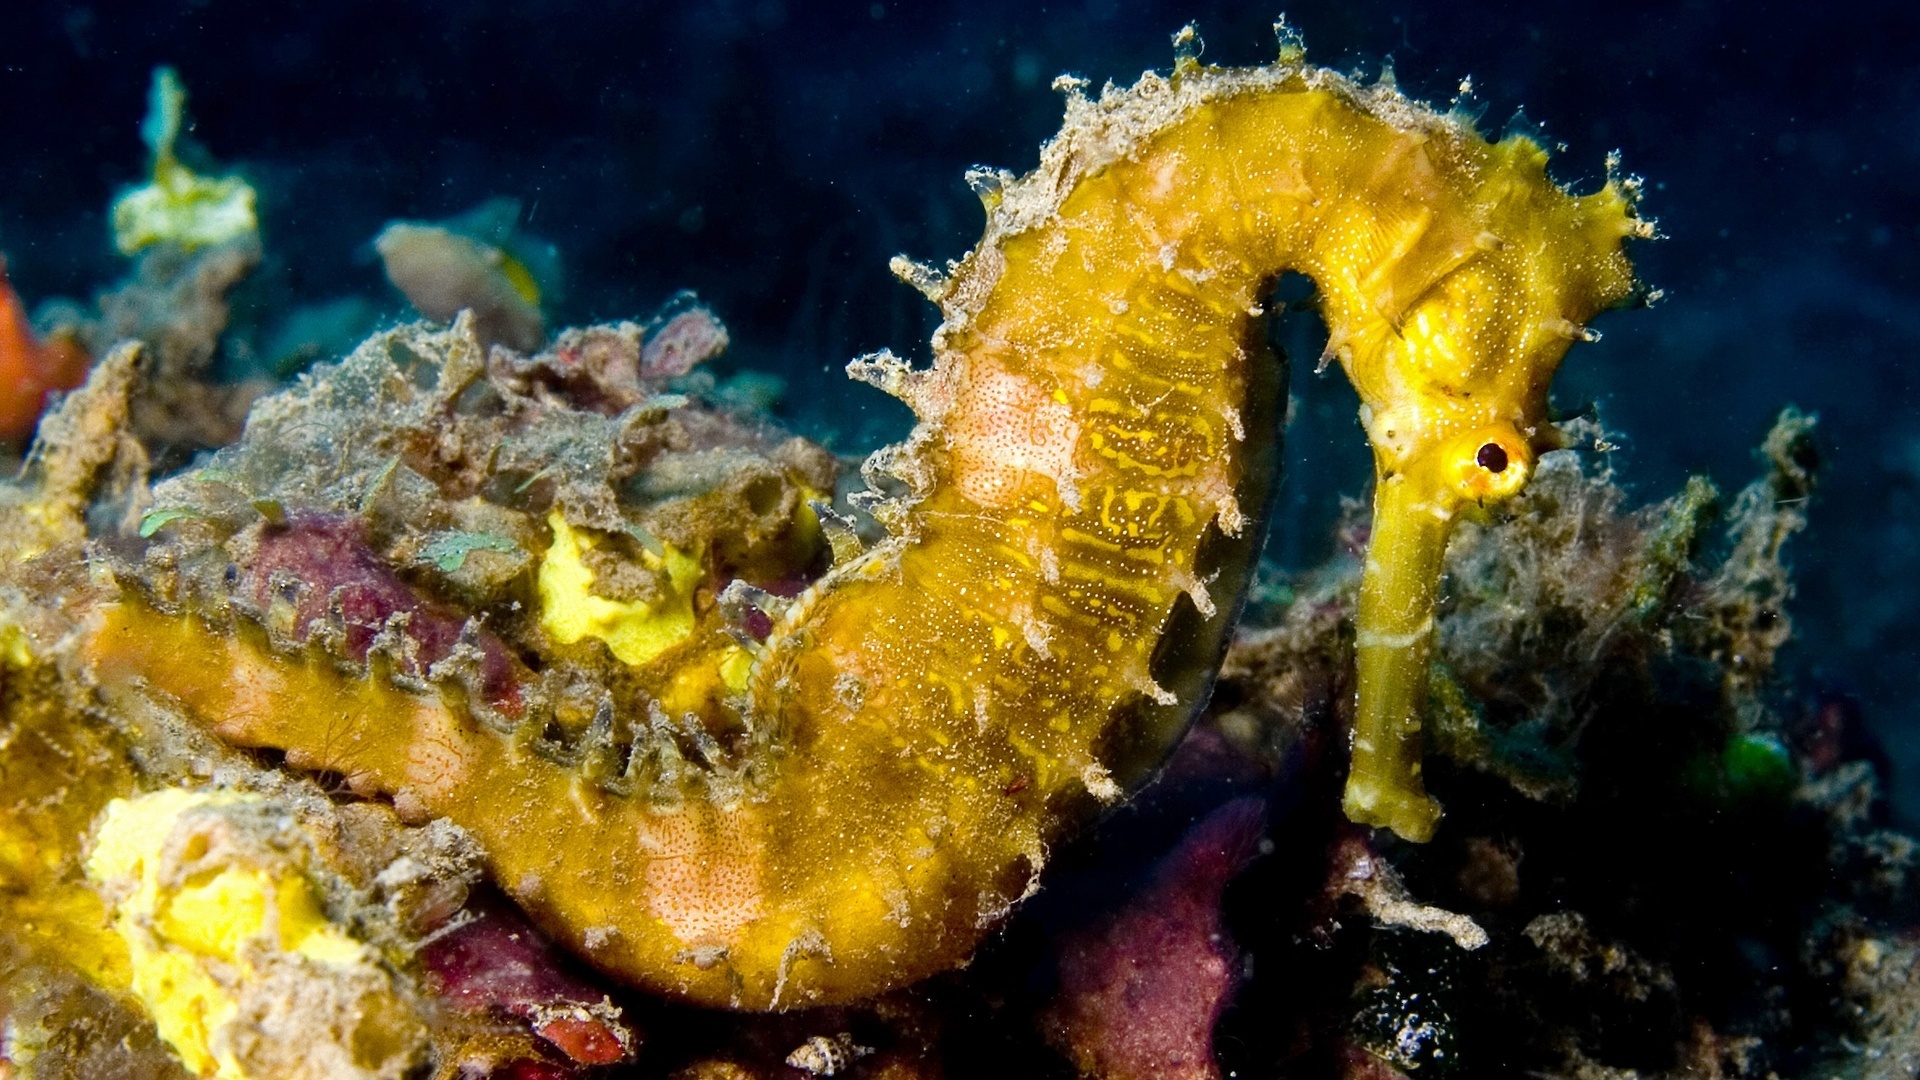 Seahorse wallpaper collection, Captivating imagery, Oceanic charm, Aquatic serenity, 1920x1080 Full HD Desktop